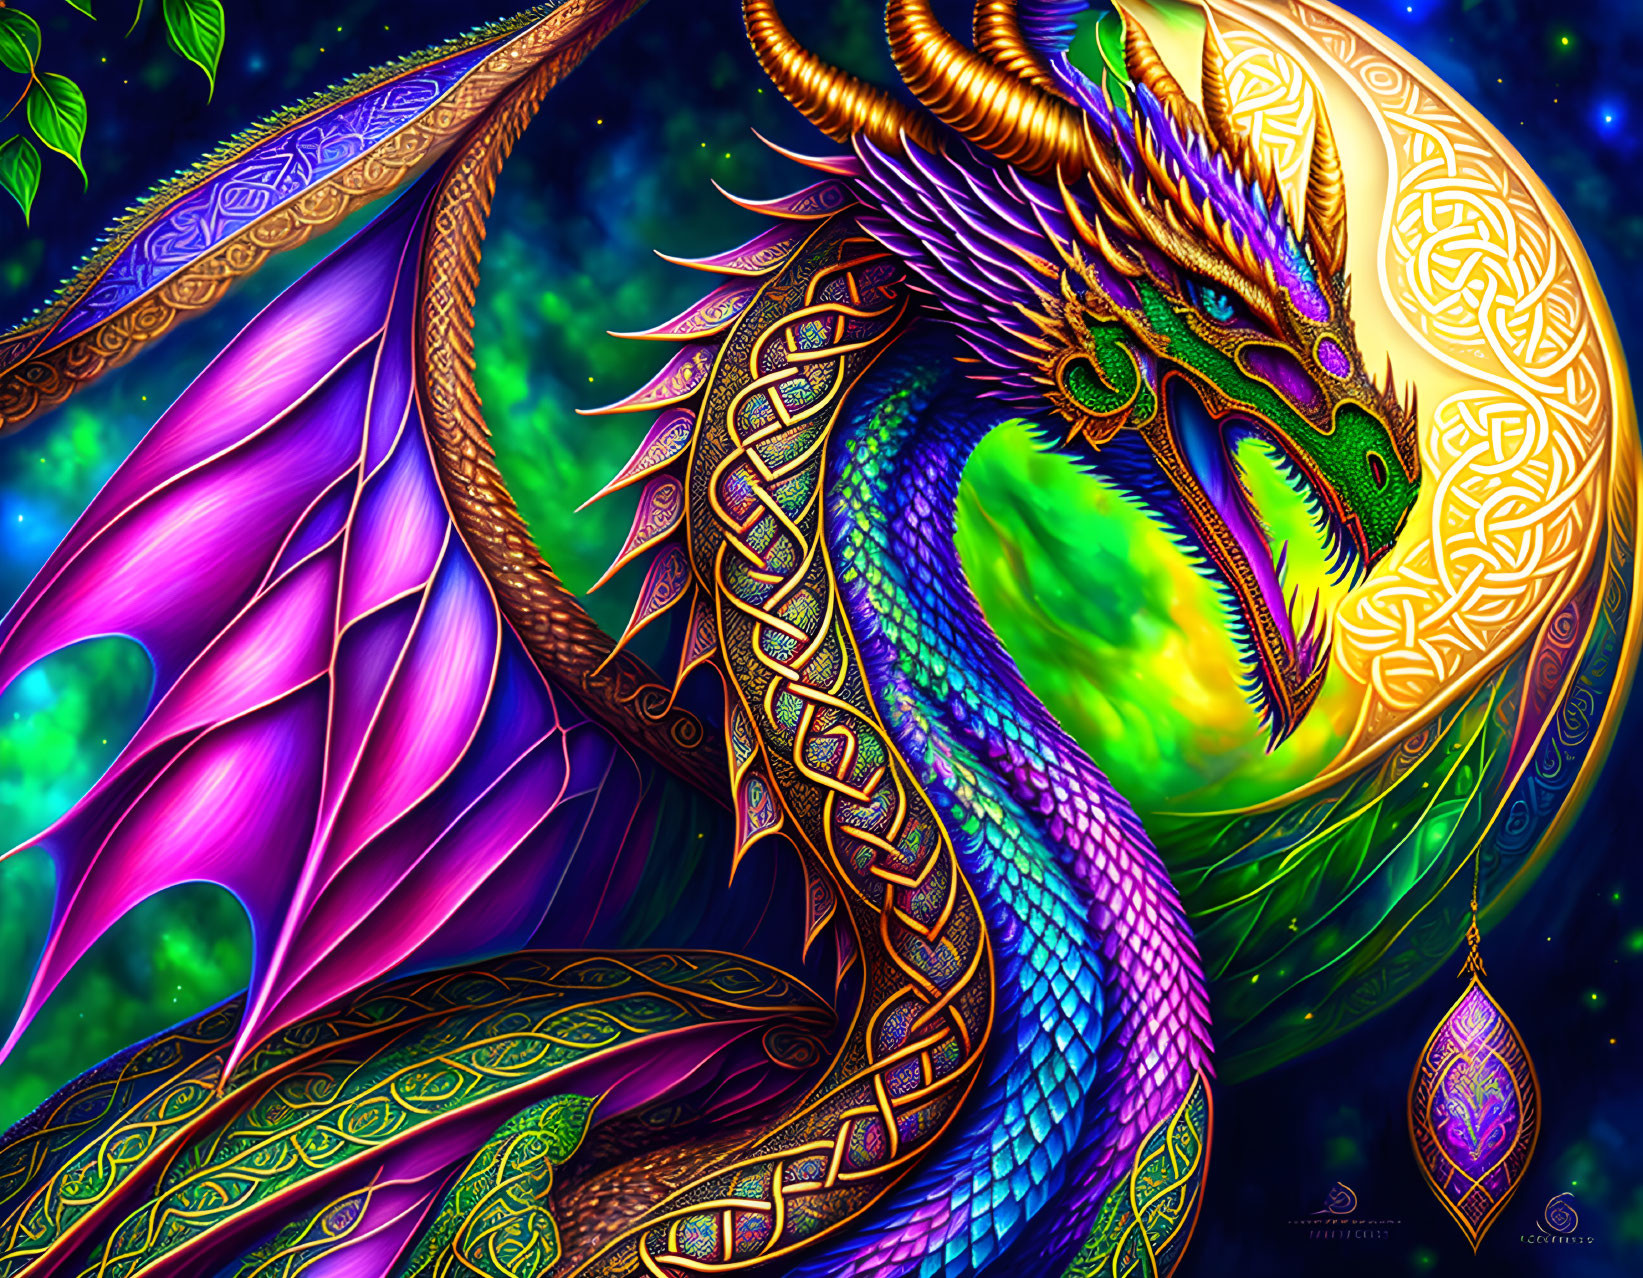 Colorful Dragon Artwork with Majestic Purple Wings and Glowing Orb